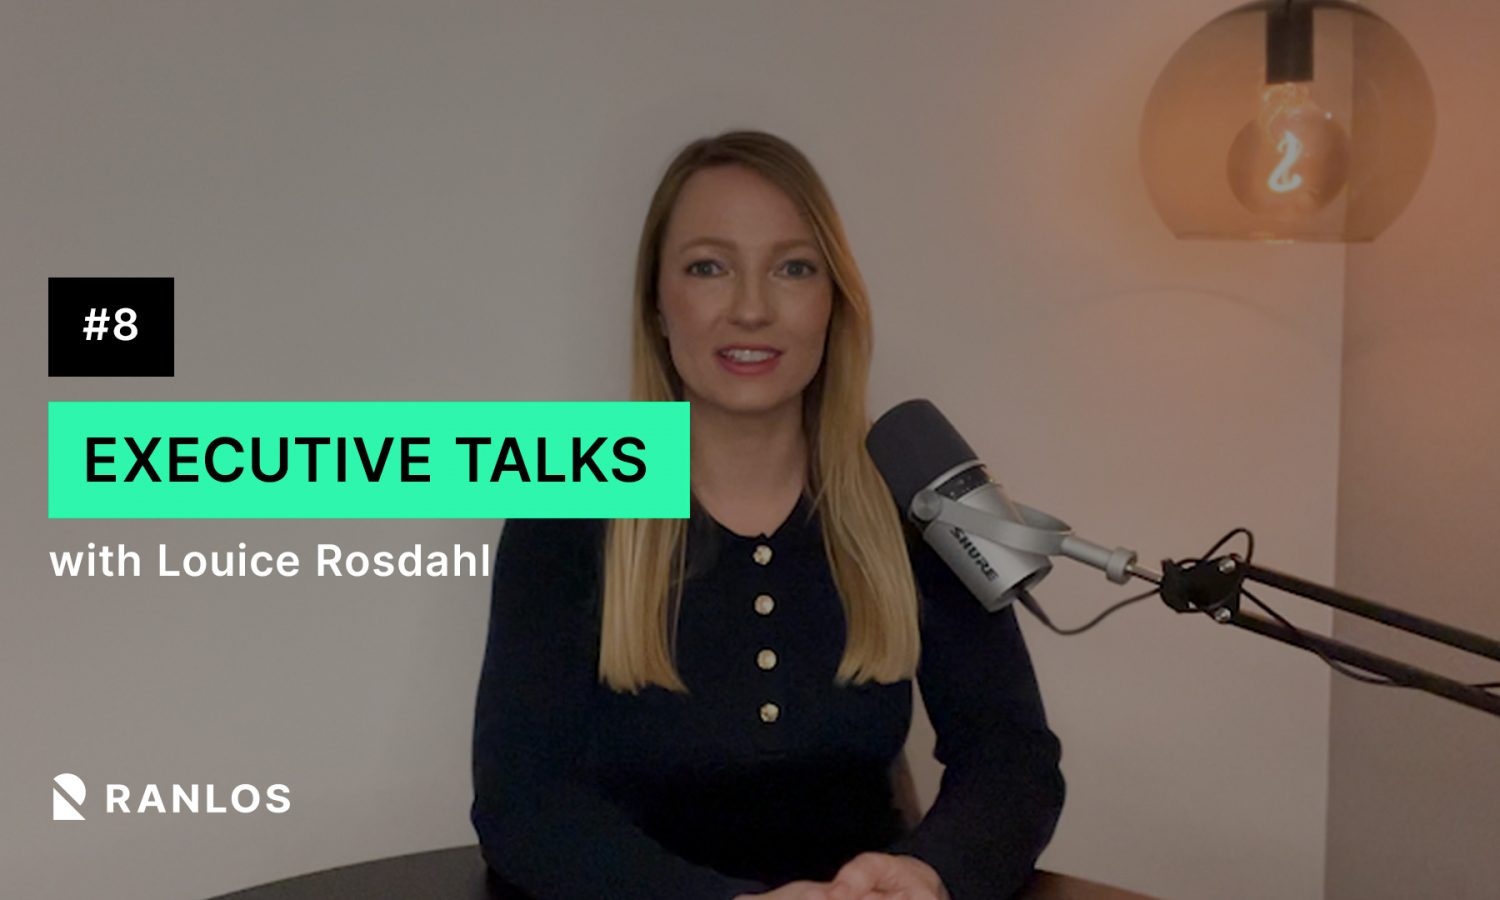 Executive Talks #8 - Automotive trends and insights